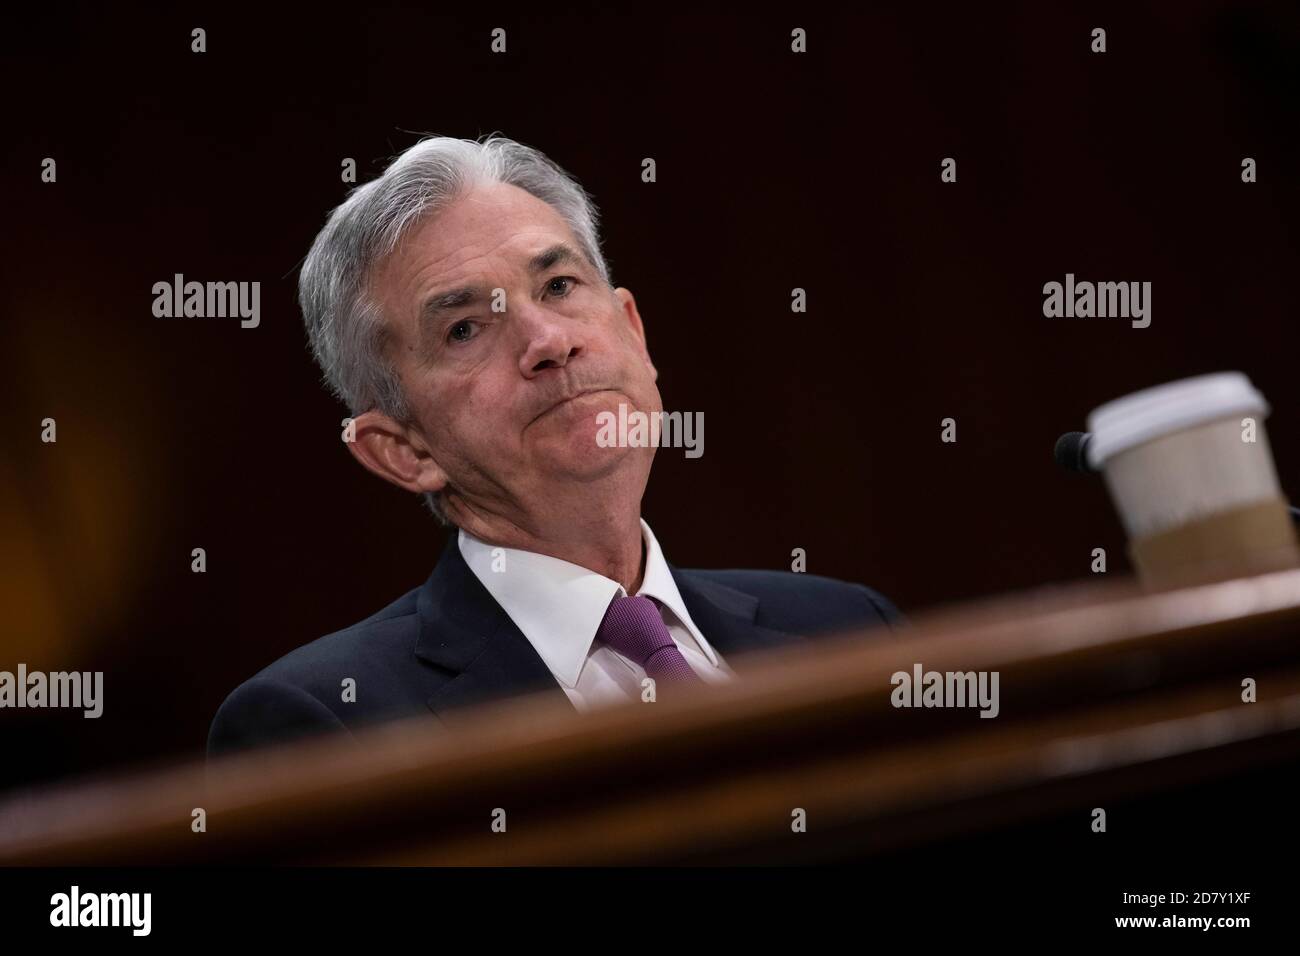 Jerome Powell, Chair of the Federal Reserve delivers the Federal Reserves' 'Semiannual Monetary Policy Report to Congress' before the Senate Banking Committee on Capitol Hill in Washington, D.C. on February 26, 2019. Credit: Alex Edelman/The Photo Access Stock Photo